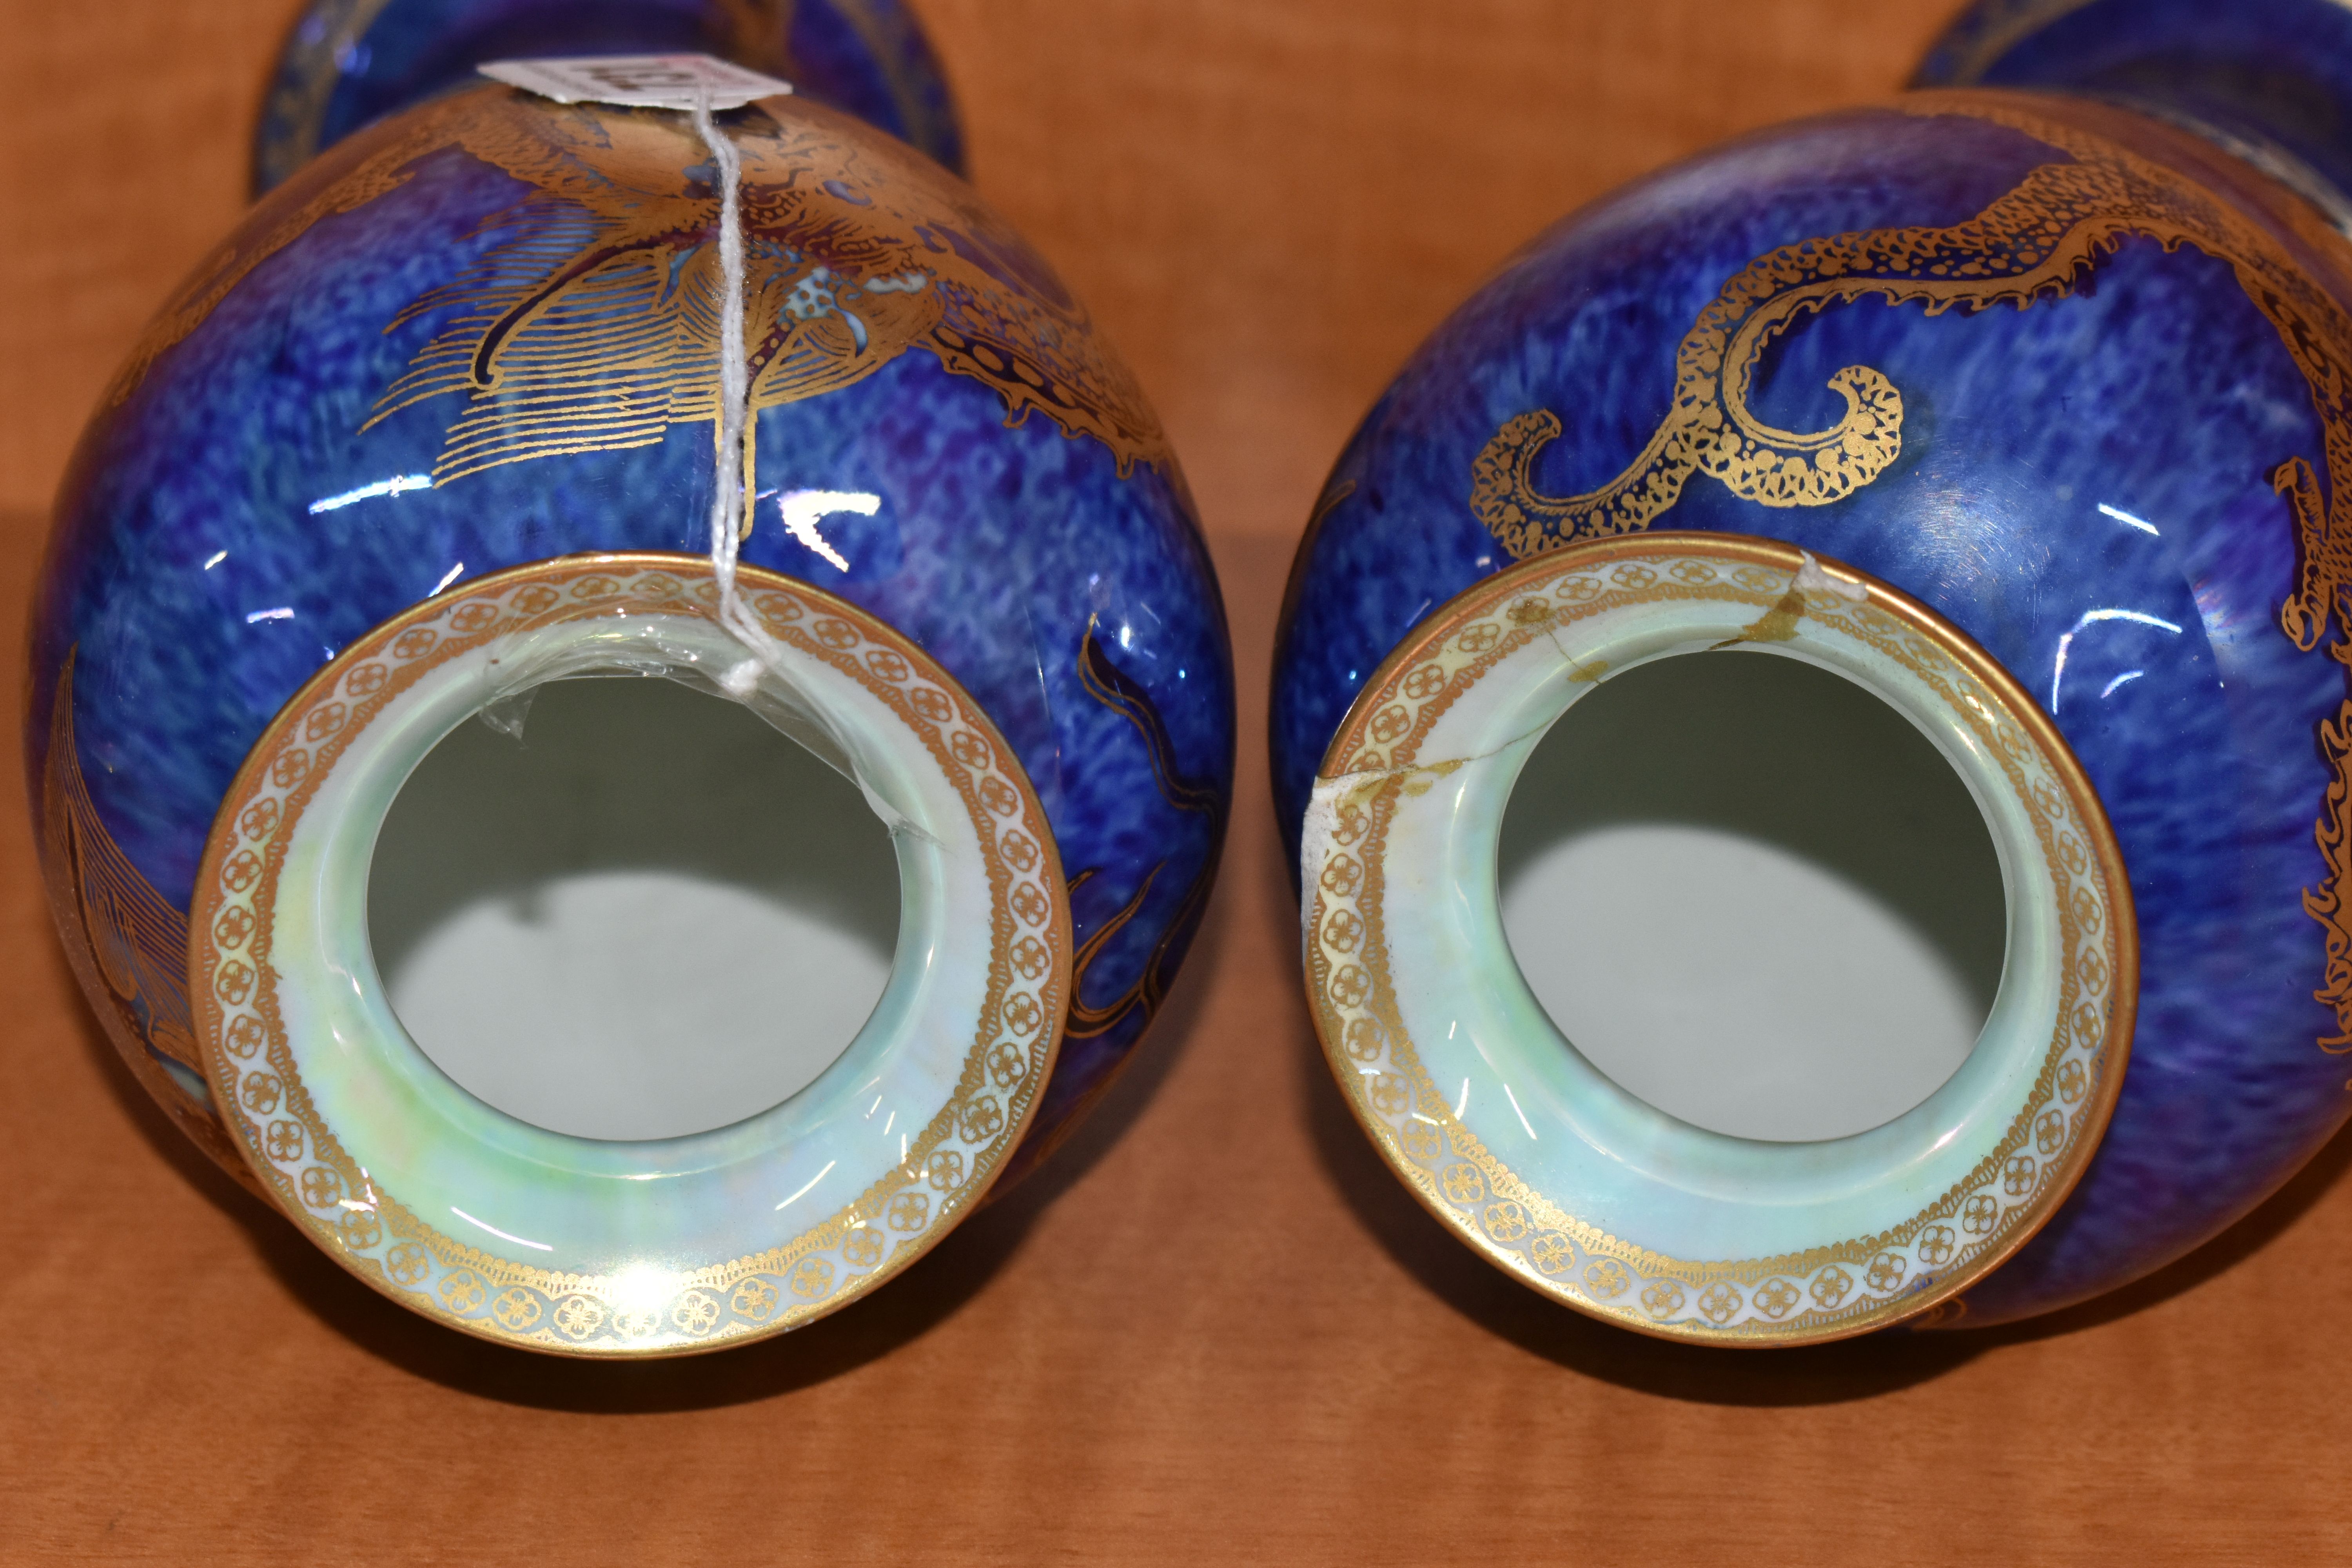 A PAIR OF WEDGWOOD DRAGON LUSTRE BALUSTER VASES, pattern Z4829, the exterior with mottled blue - Image 6 of 7